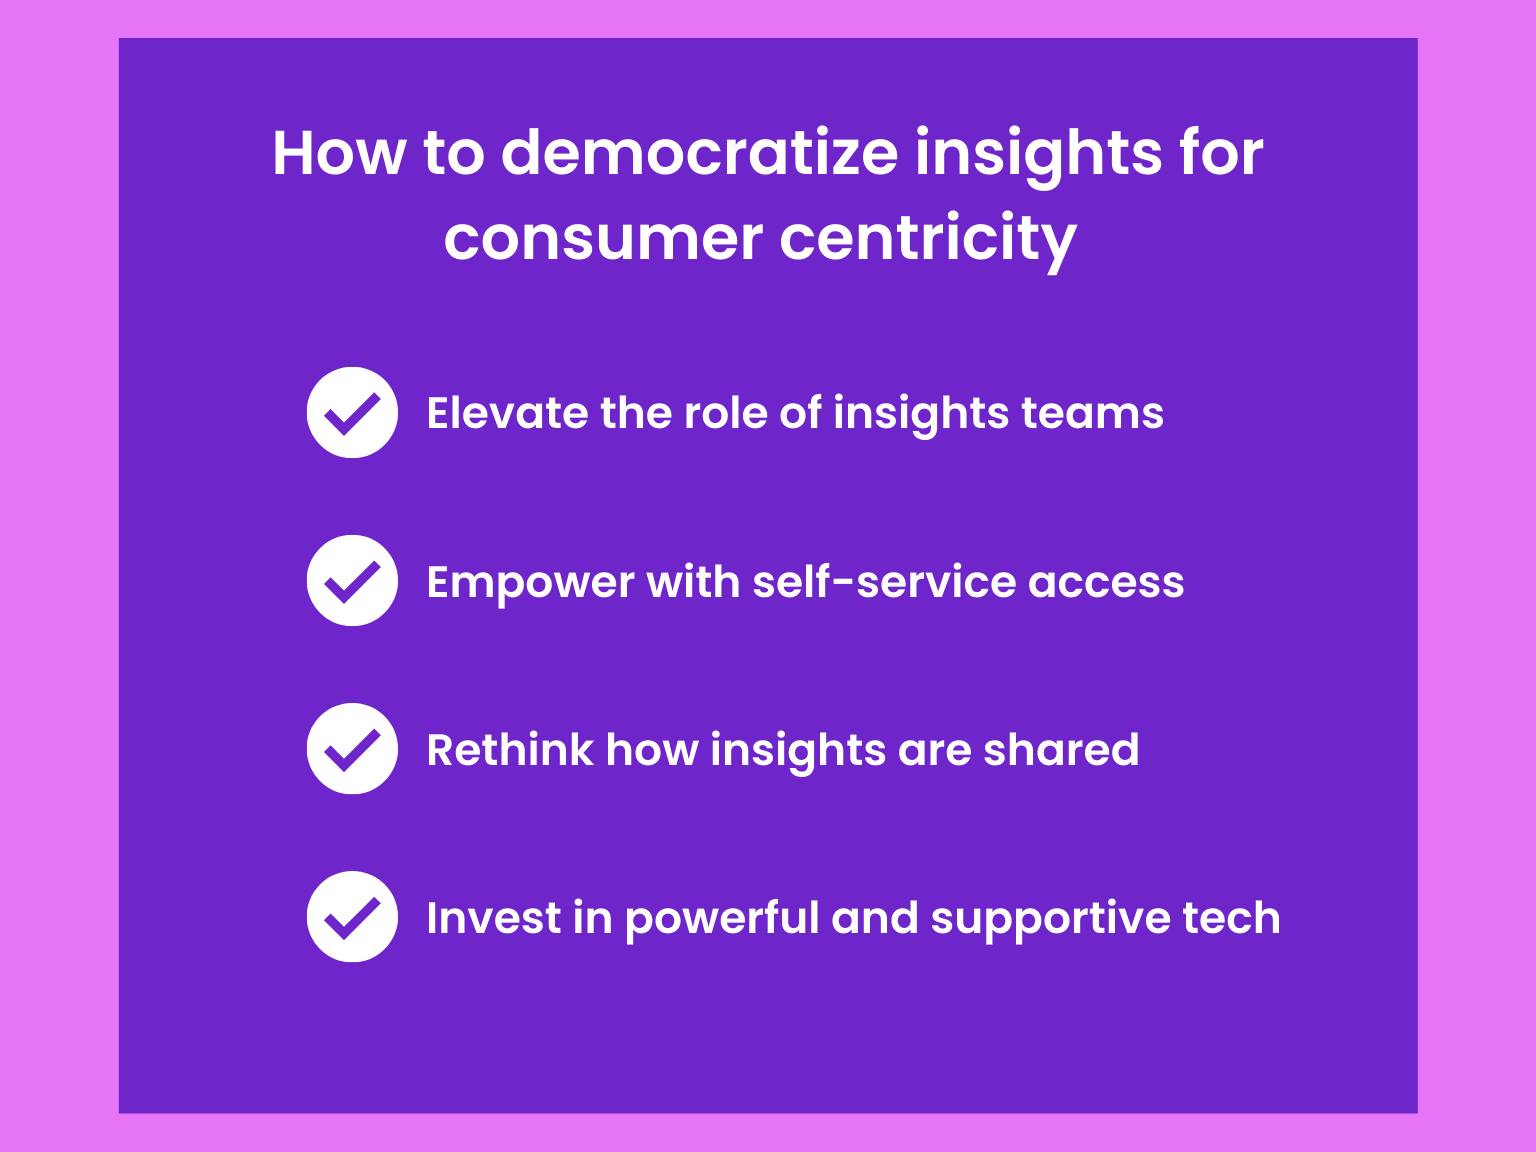 Democratizing insights for consumer centricity